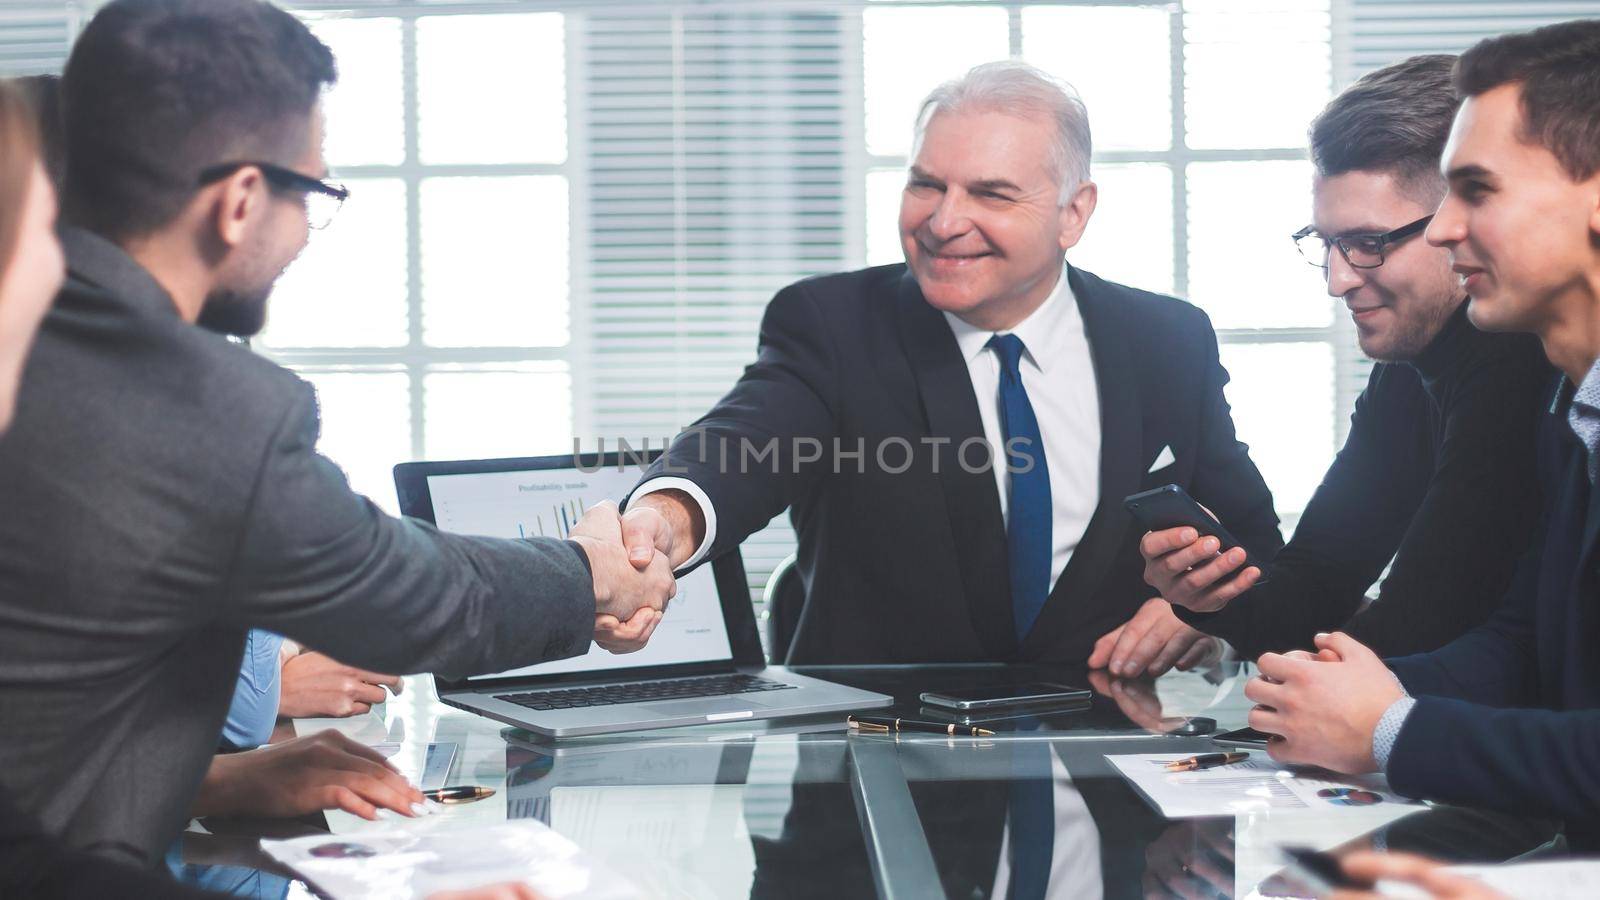 business partners shaking hands during a working meeting by SmartPhotoLab